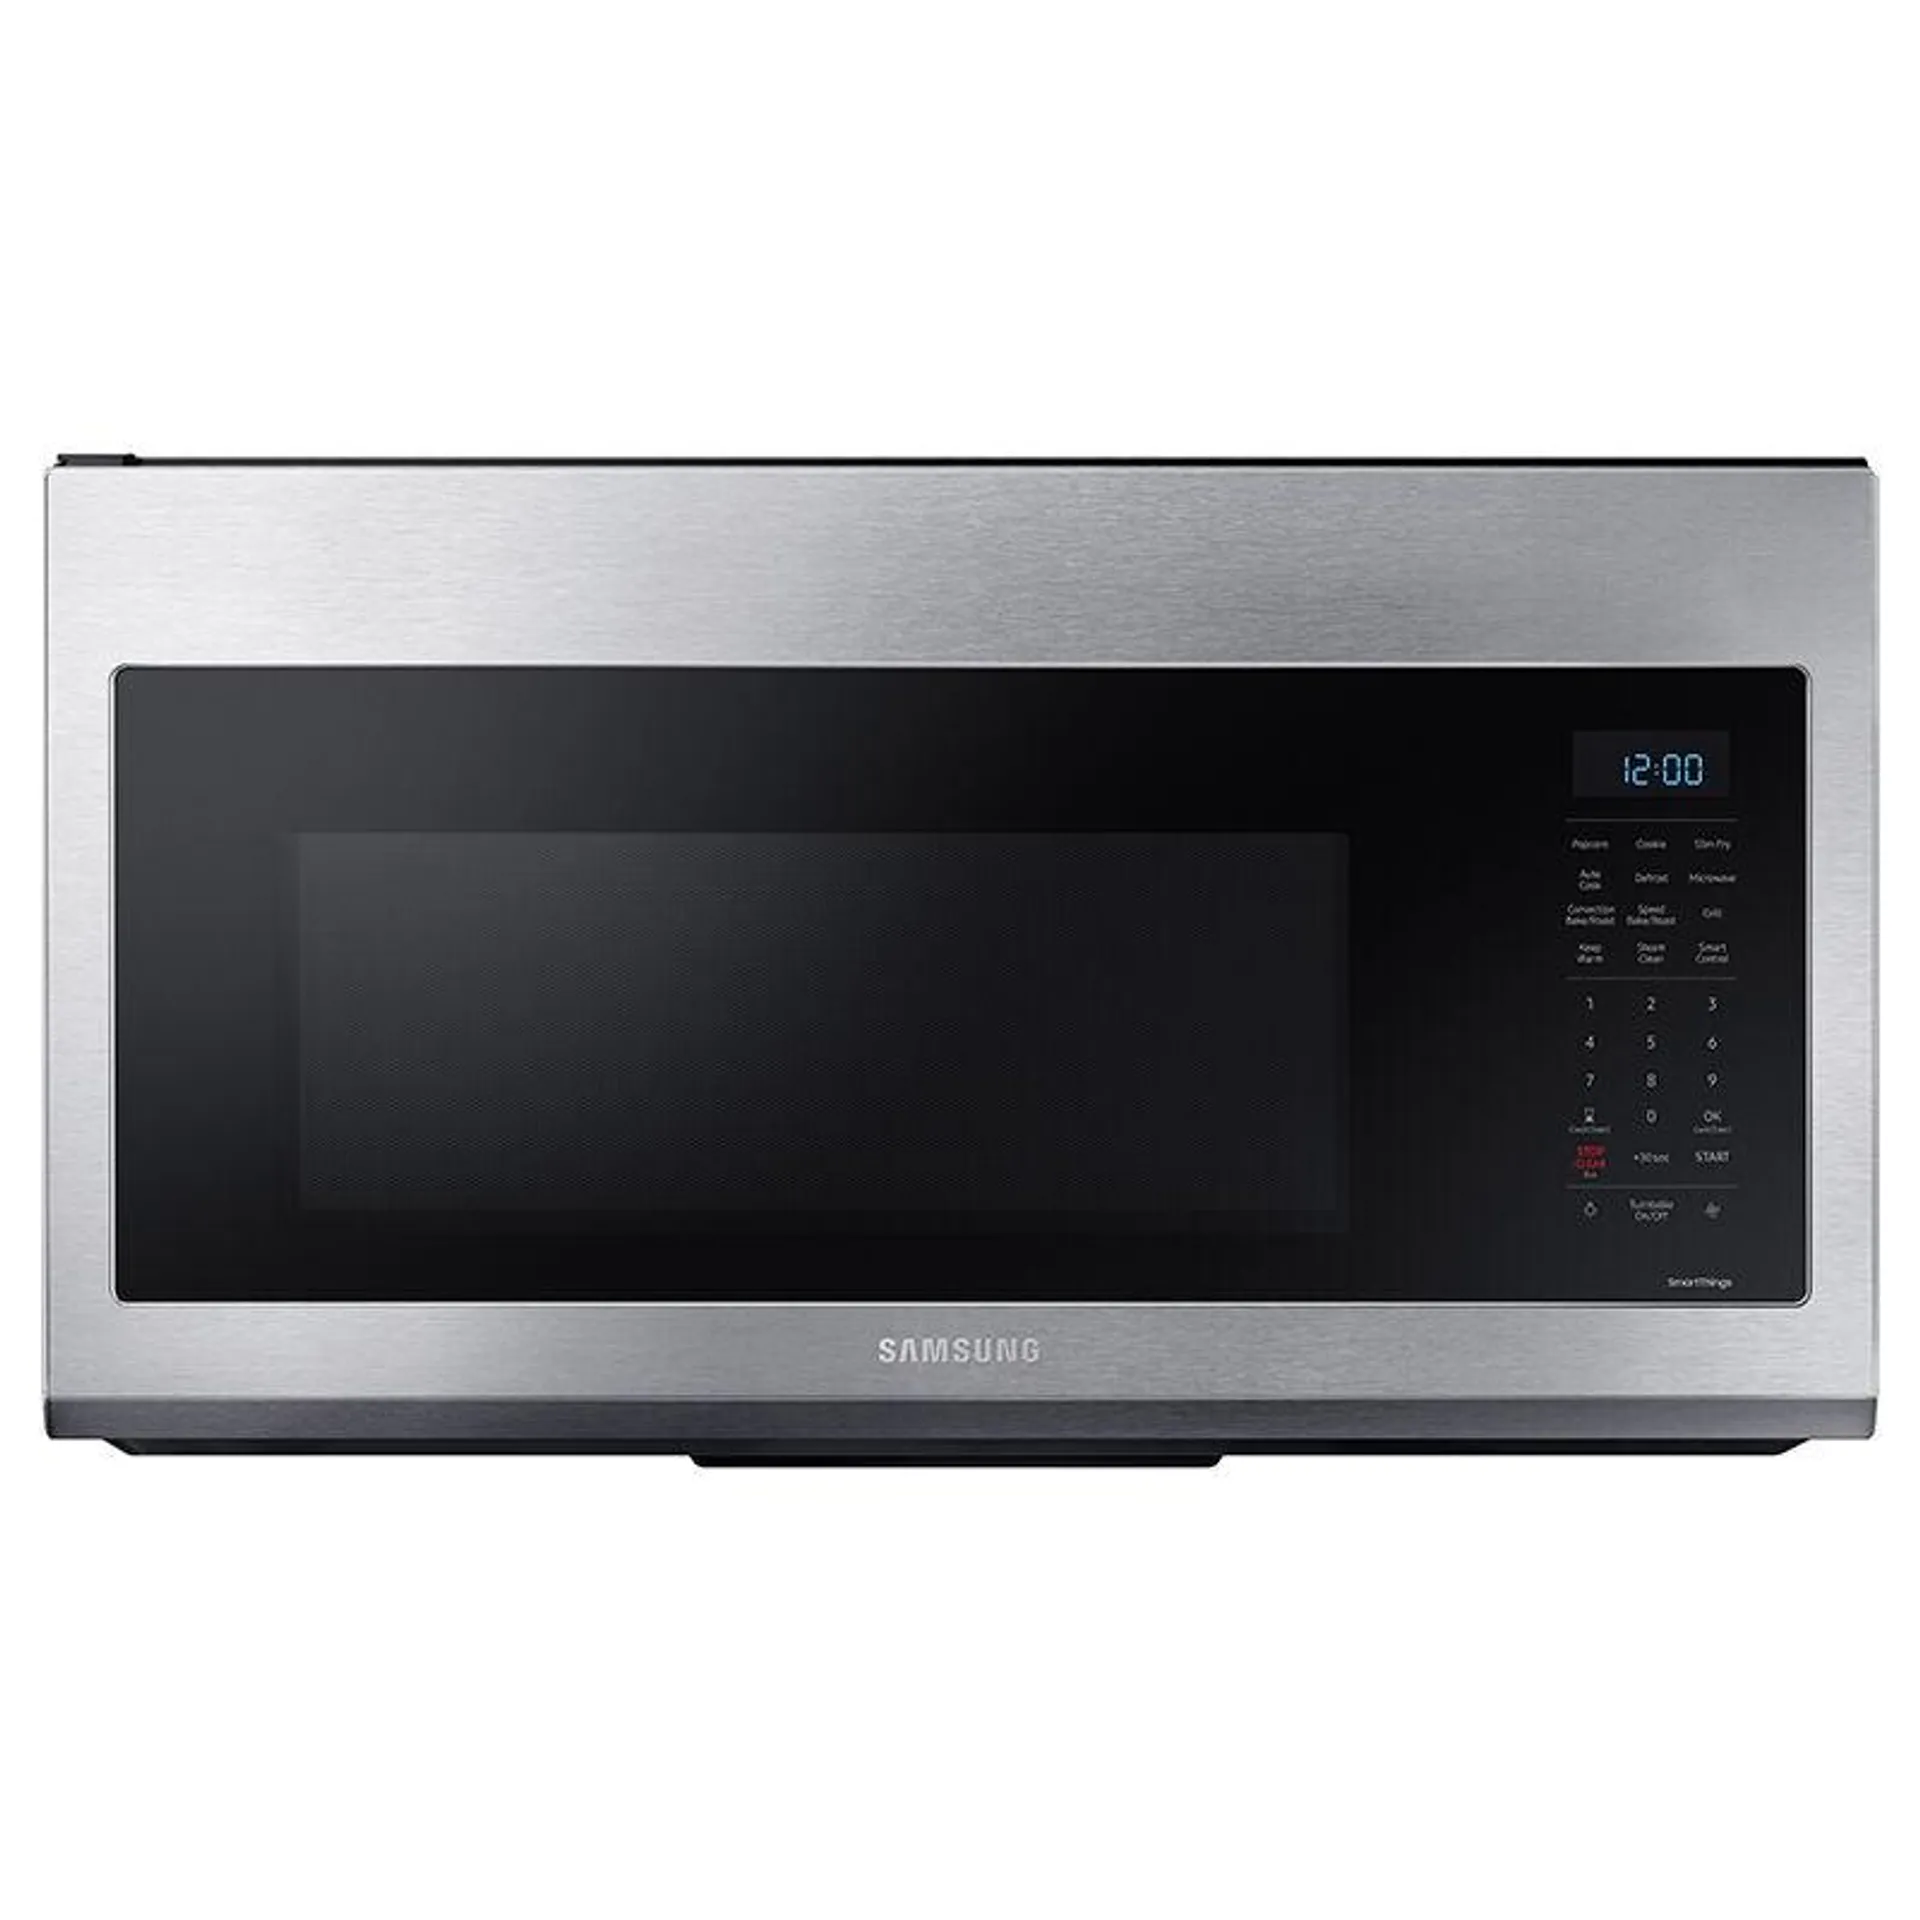 Samsung 30" 1.7 Cu. Ft. Over-the-Range Microwave with 10 Power Levels, 300 CFM & Sensor Cooking Controls - Stainless Steel